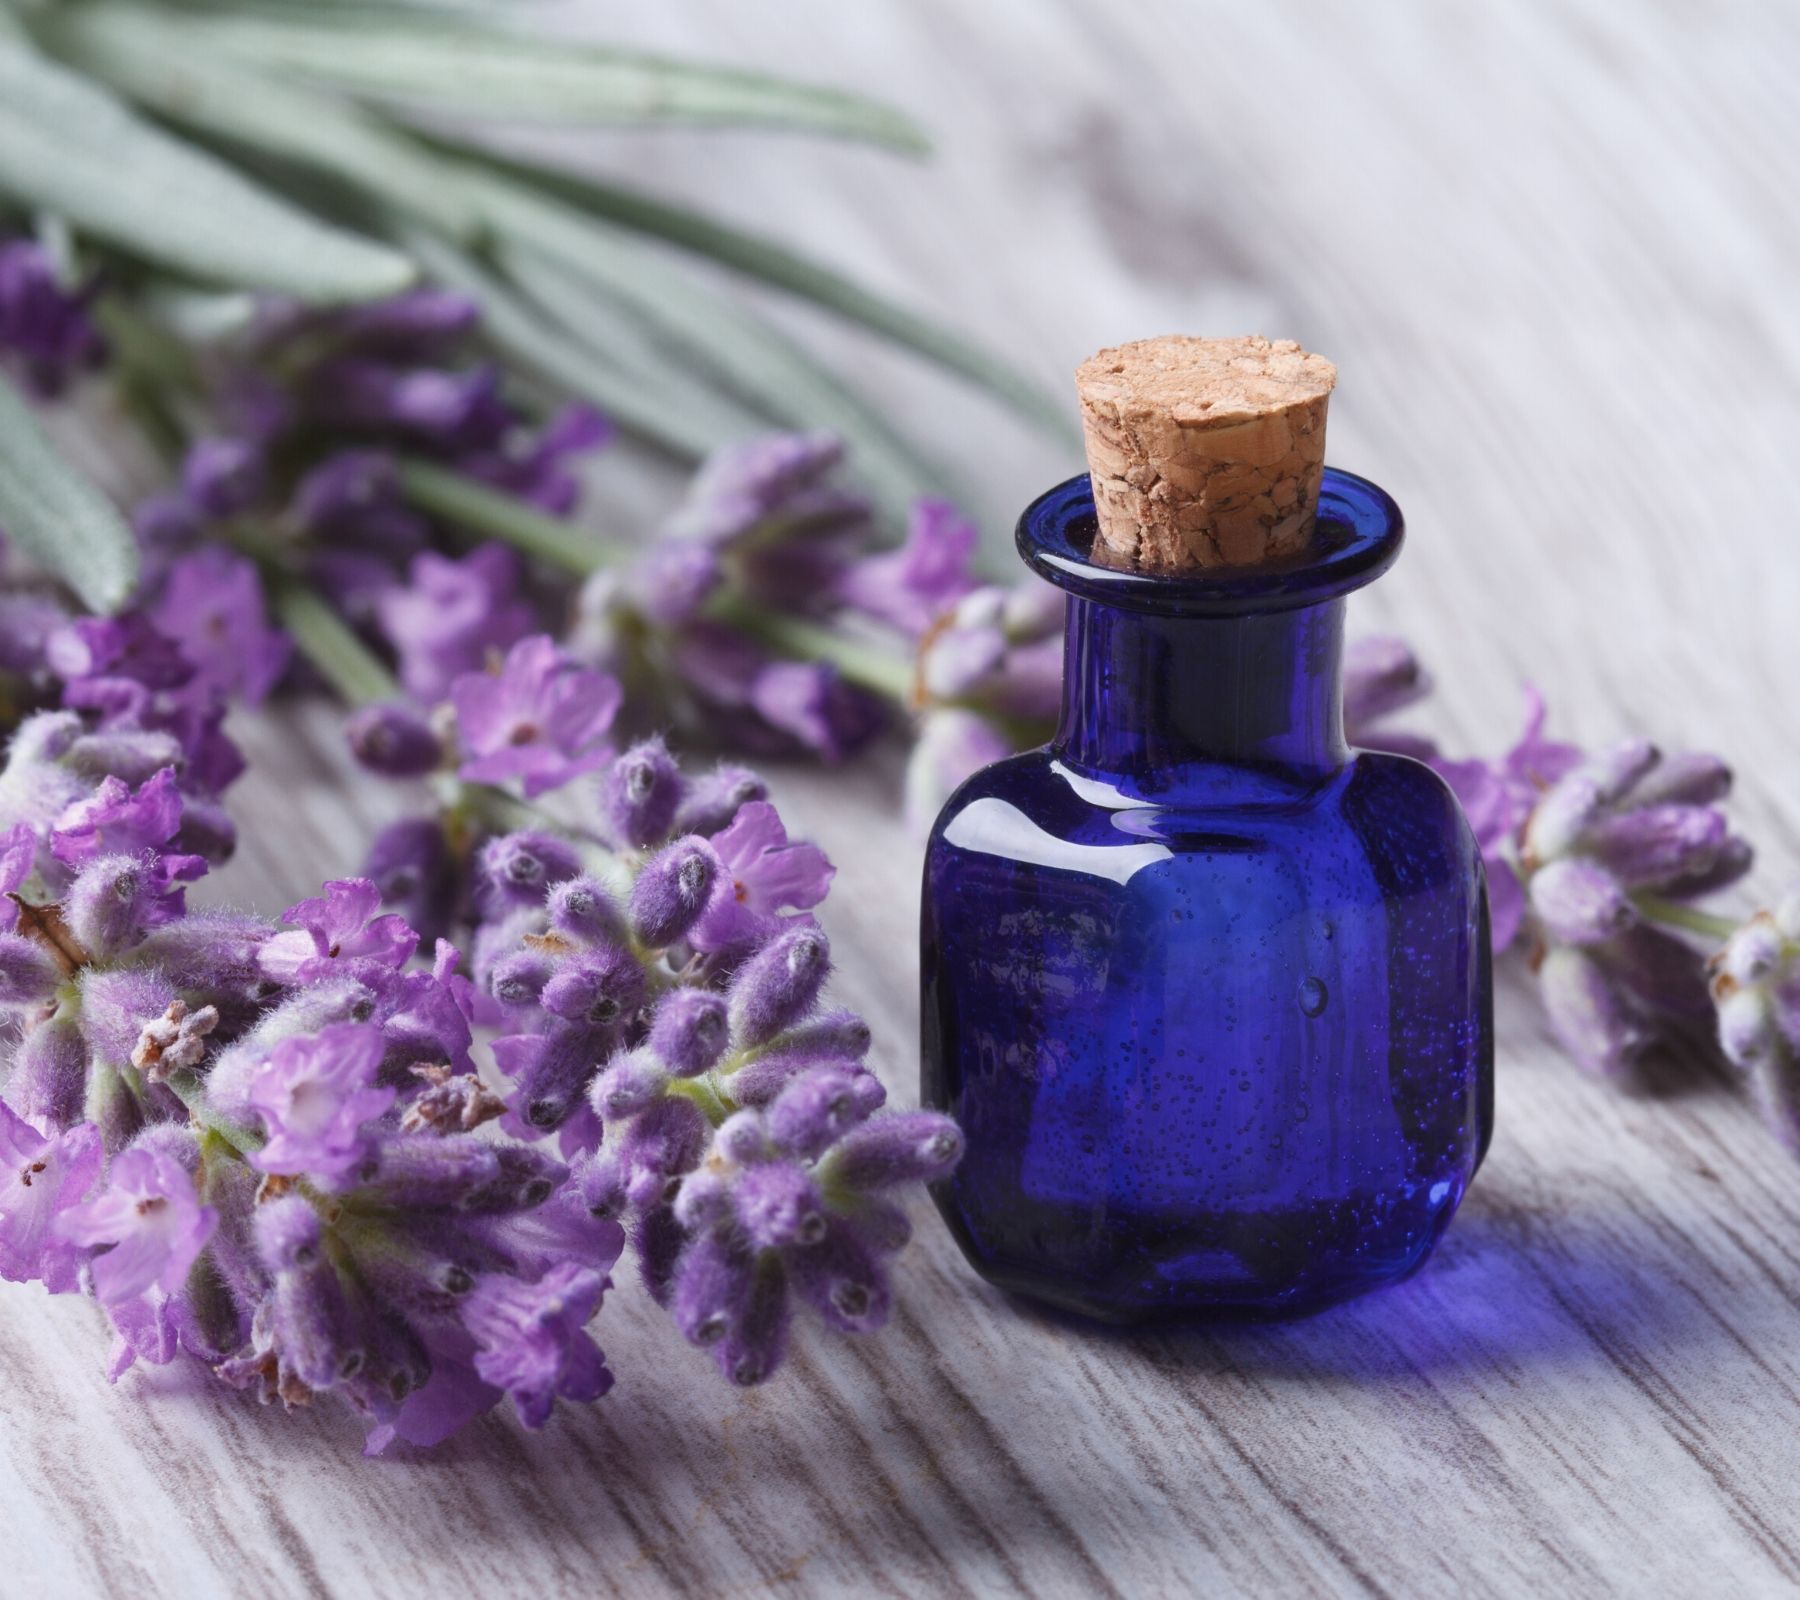 lavender oil and lavender flowers.